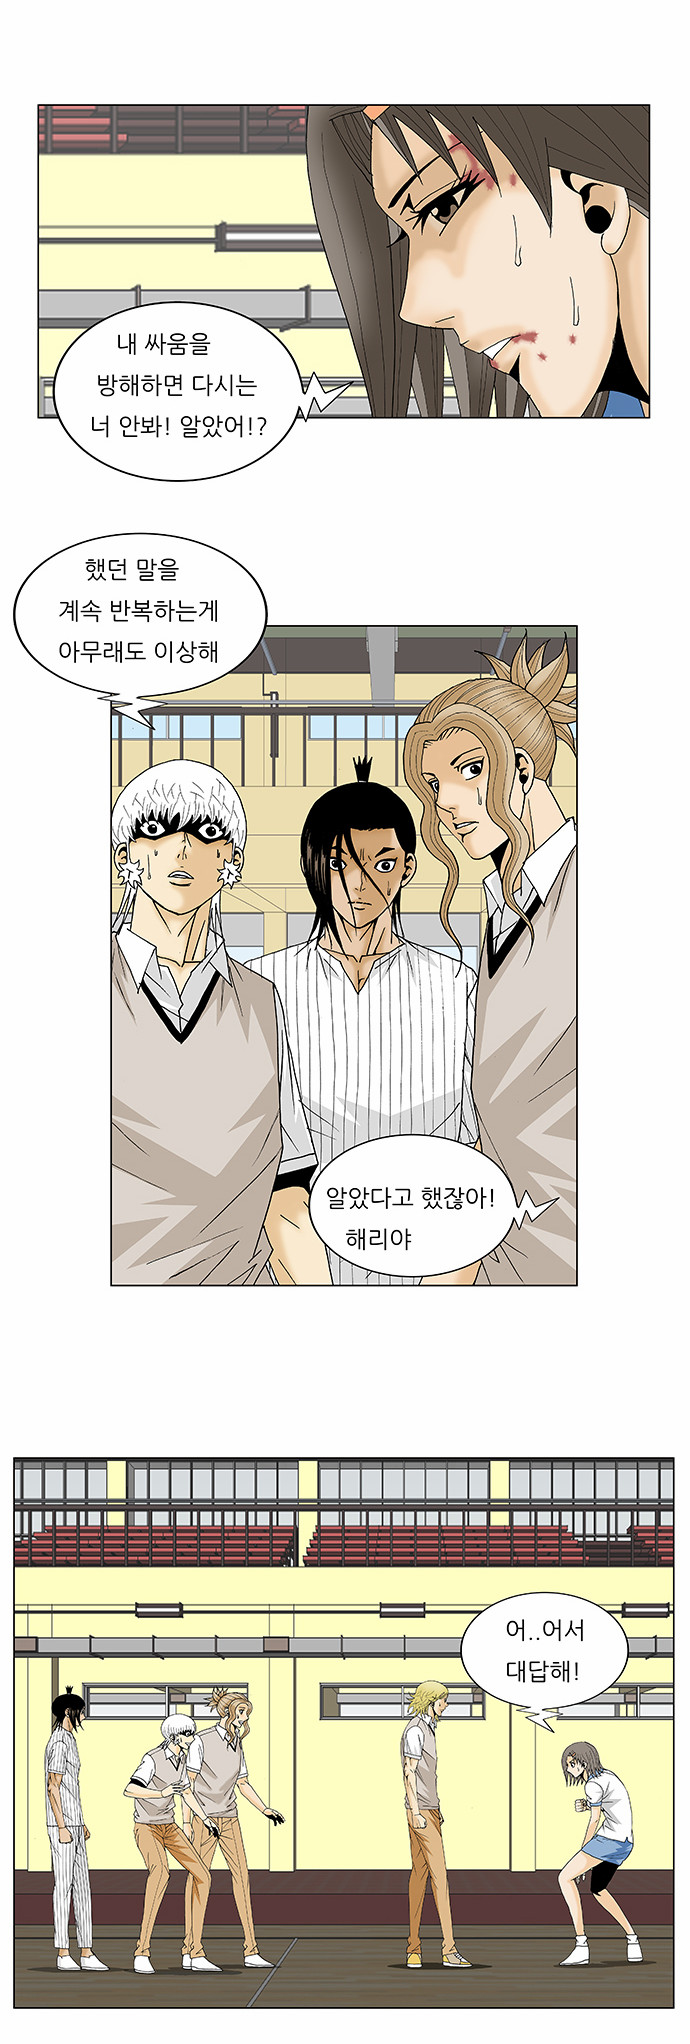 Ultimate Legend - Kang Hae Hyo - Chapter 106 - Page 4